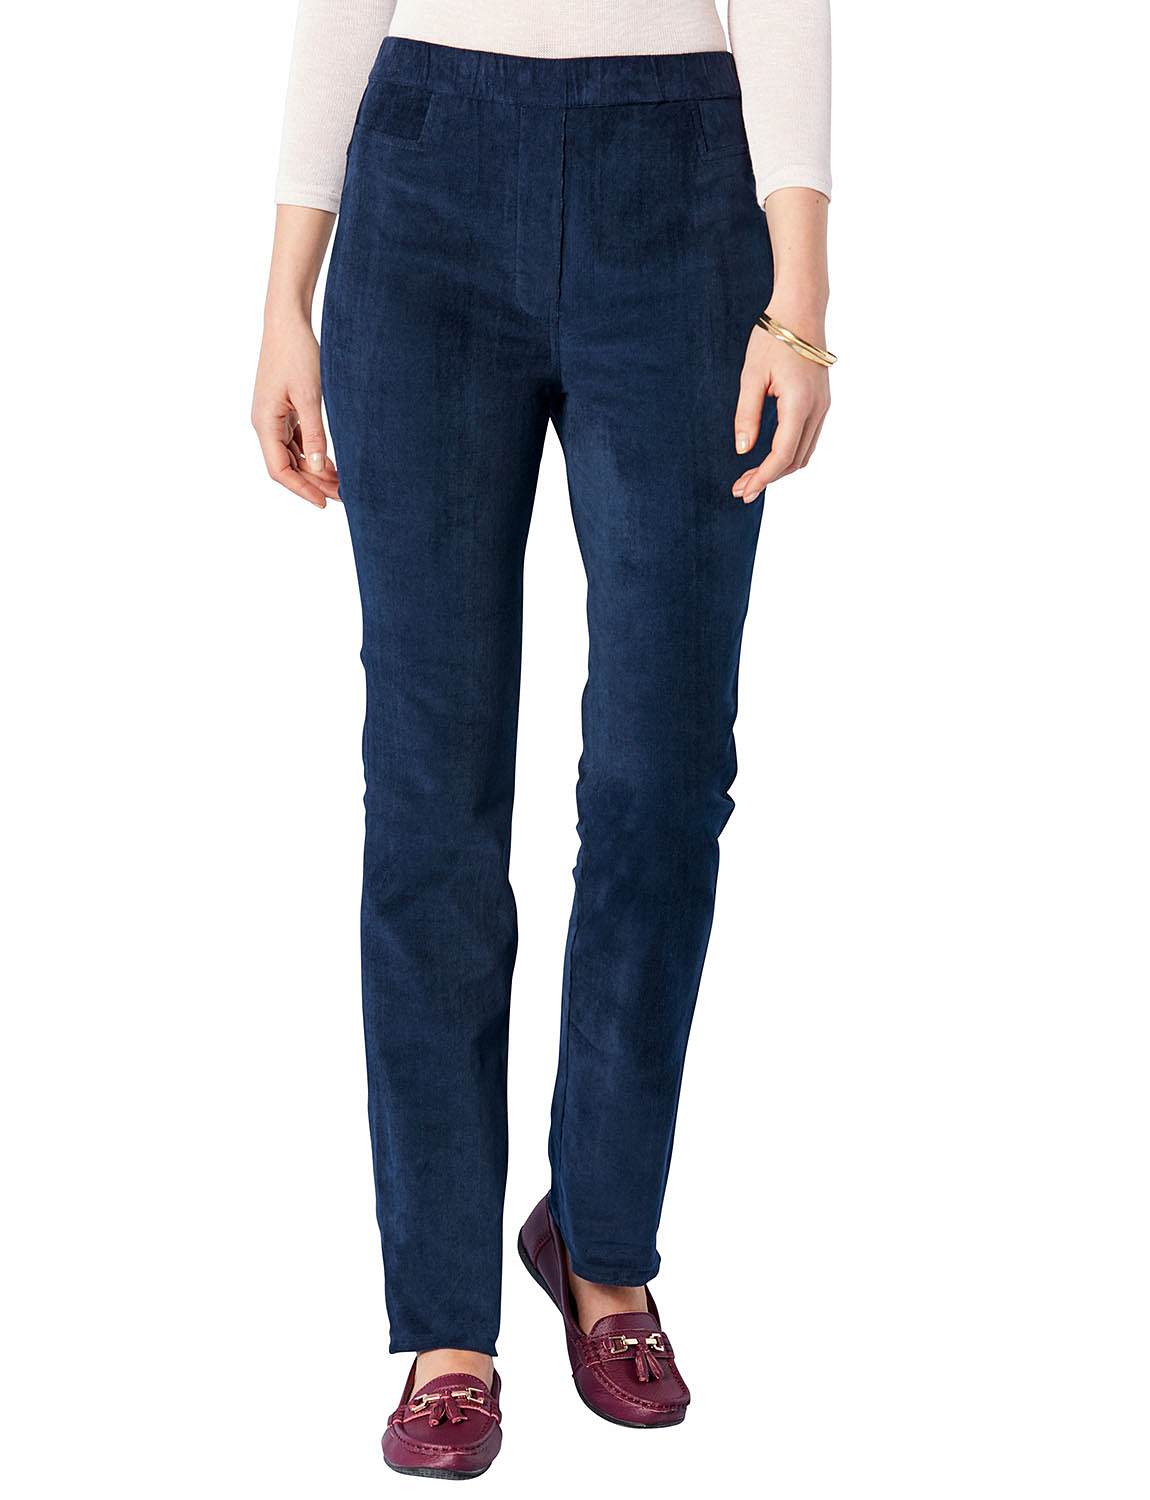 Will Corduroy Trousers  Midnight Blue  Organic Cotton  Octobre Éditions